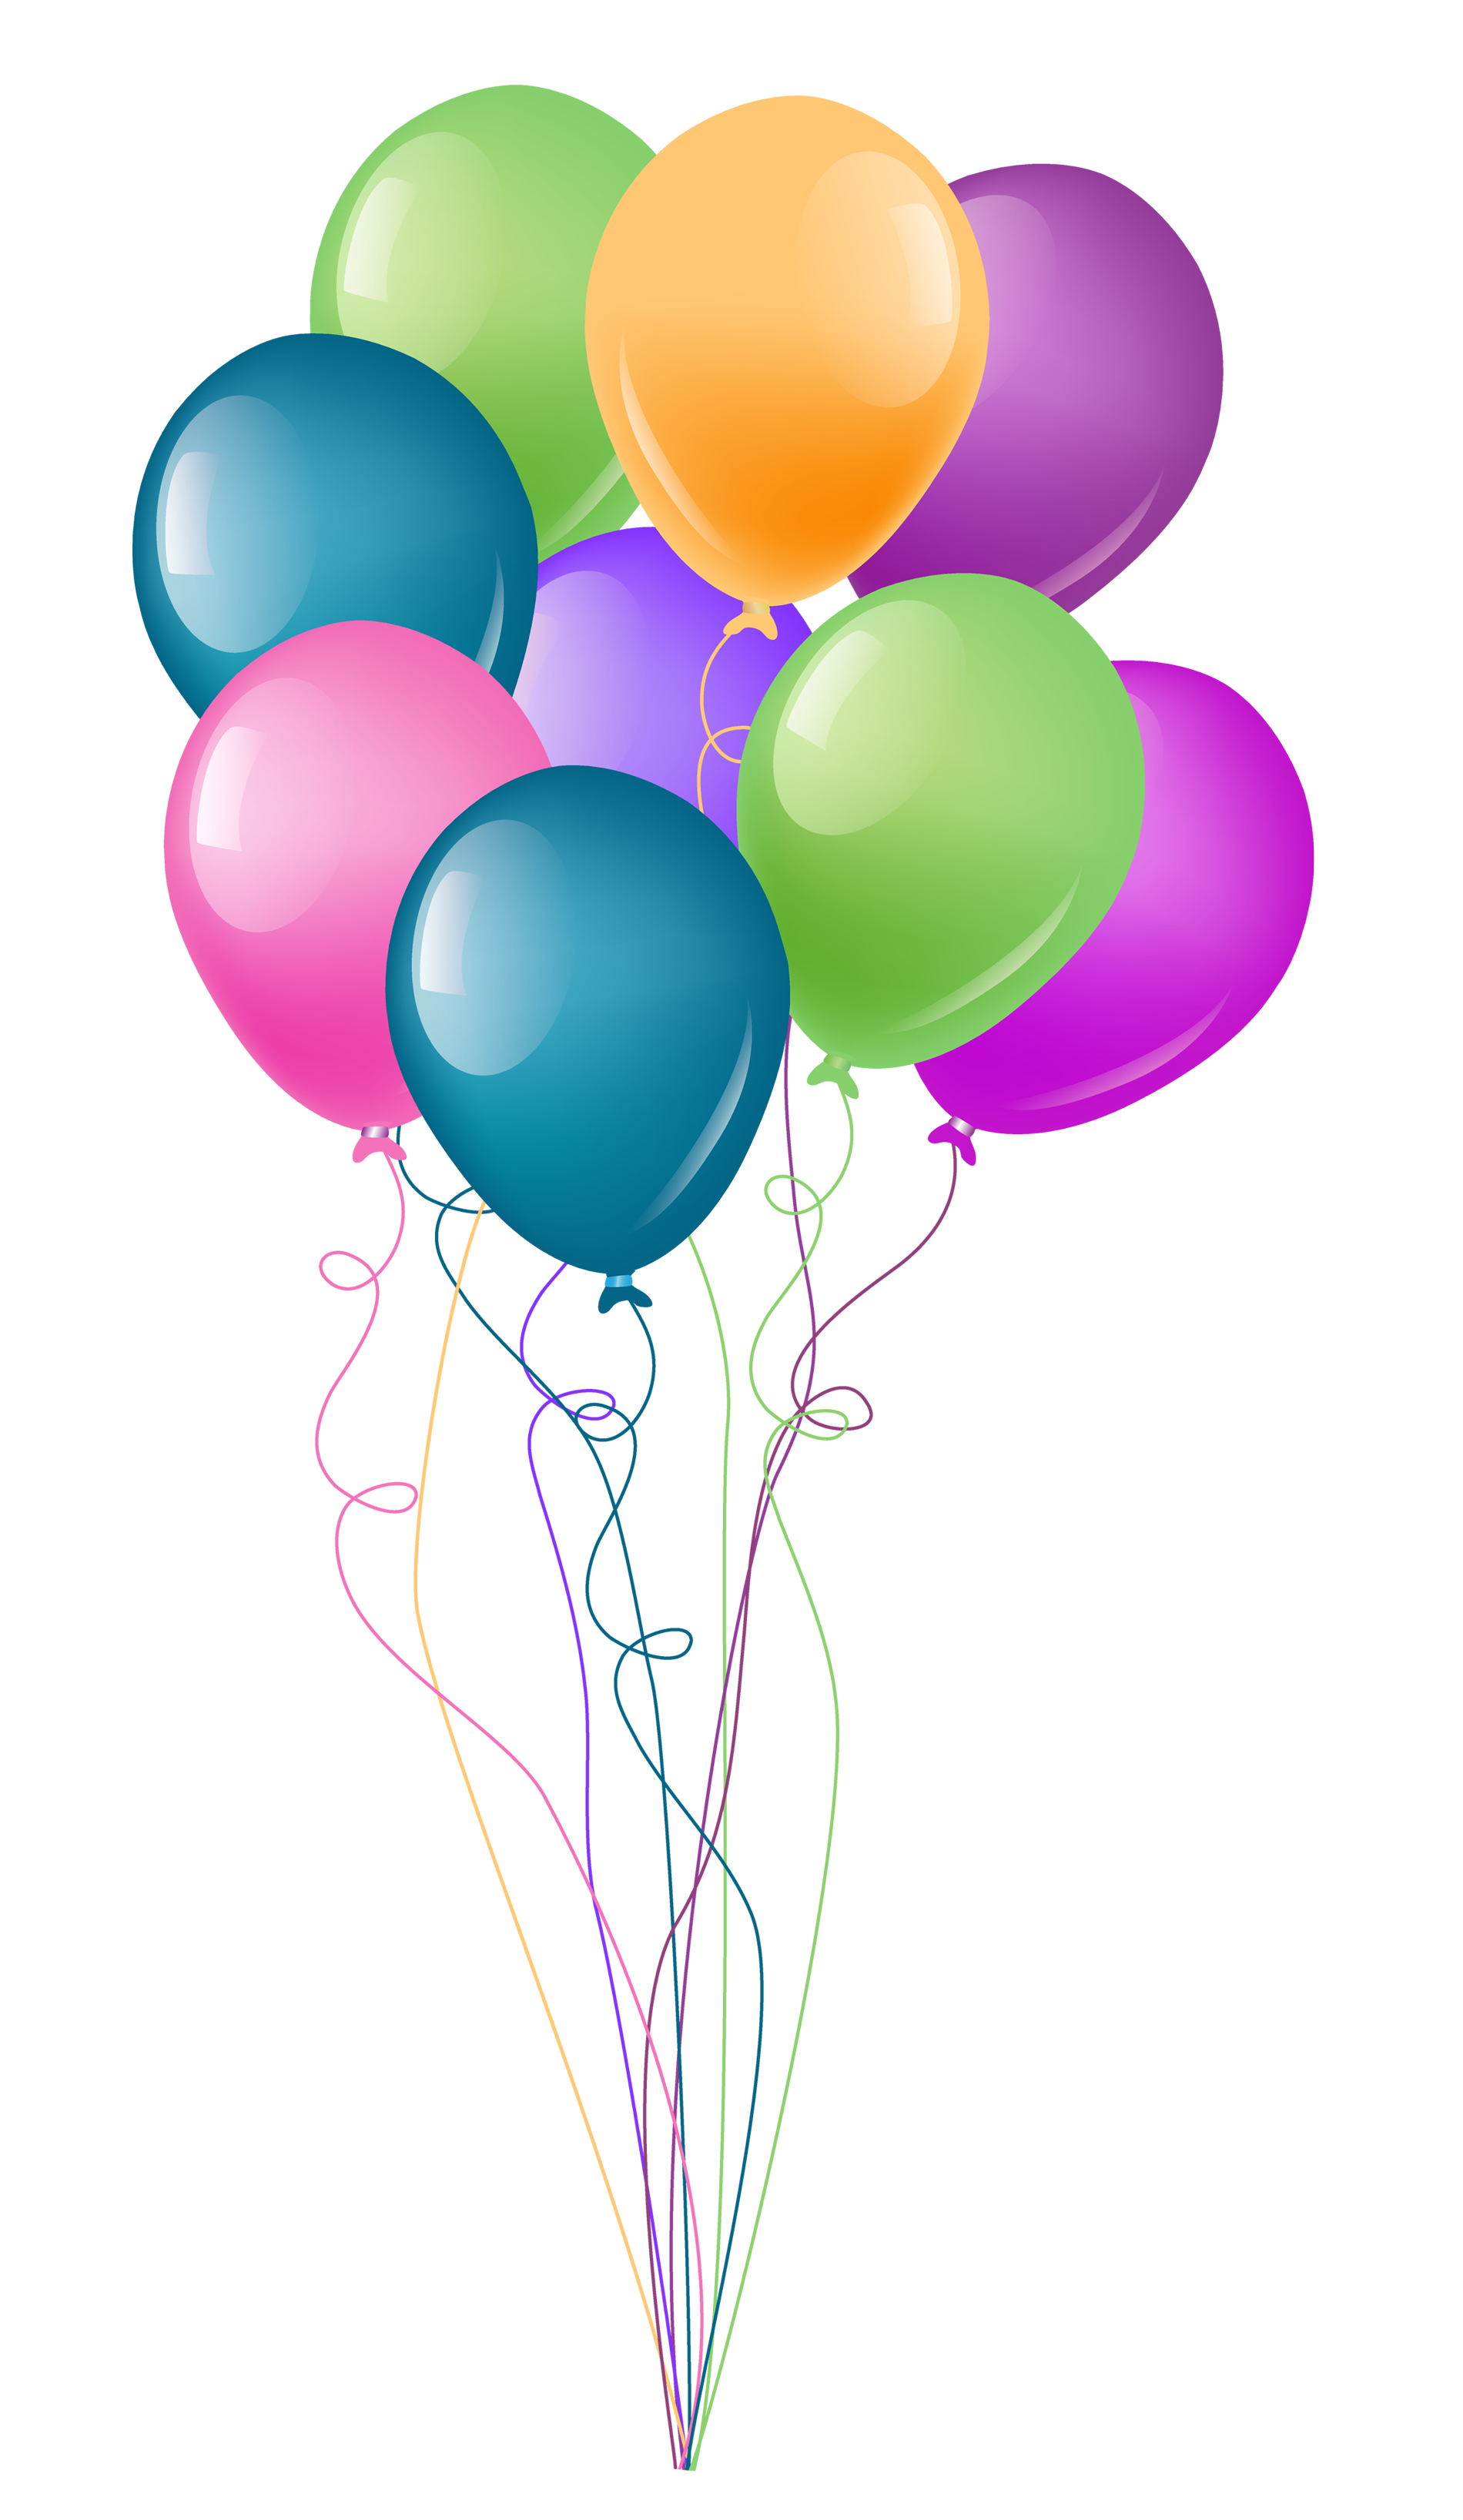 Balloons Png 3 PNG Image